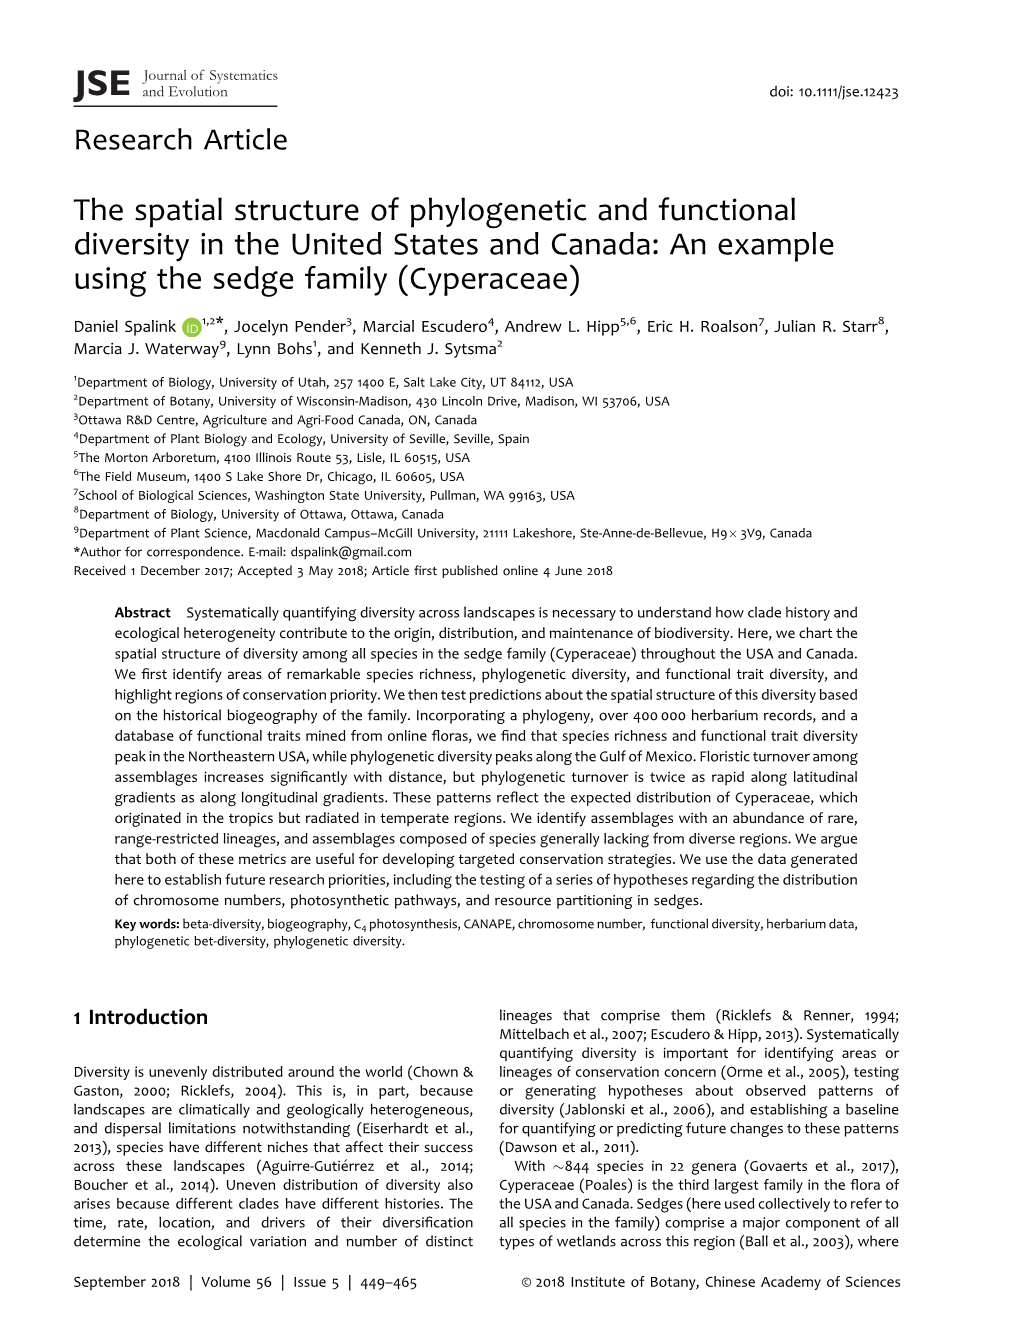 The Spatial Structure of Phylogenetic and Functional Diversity in the United States and Canada: an Example Using the Sedge Family (Cyperaceae)